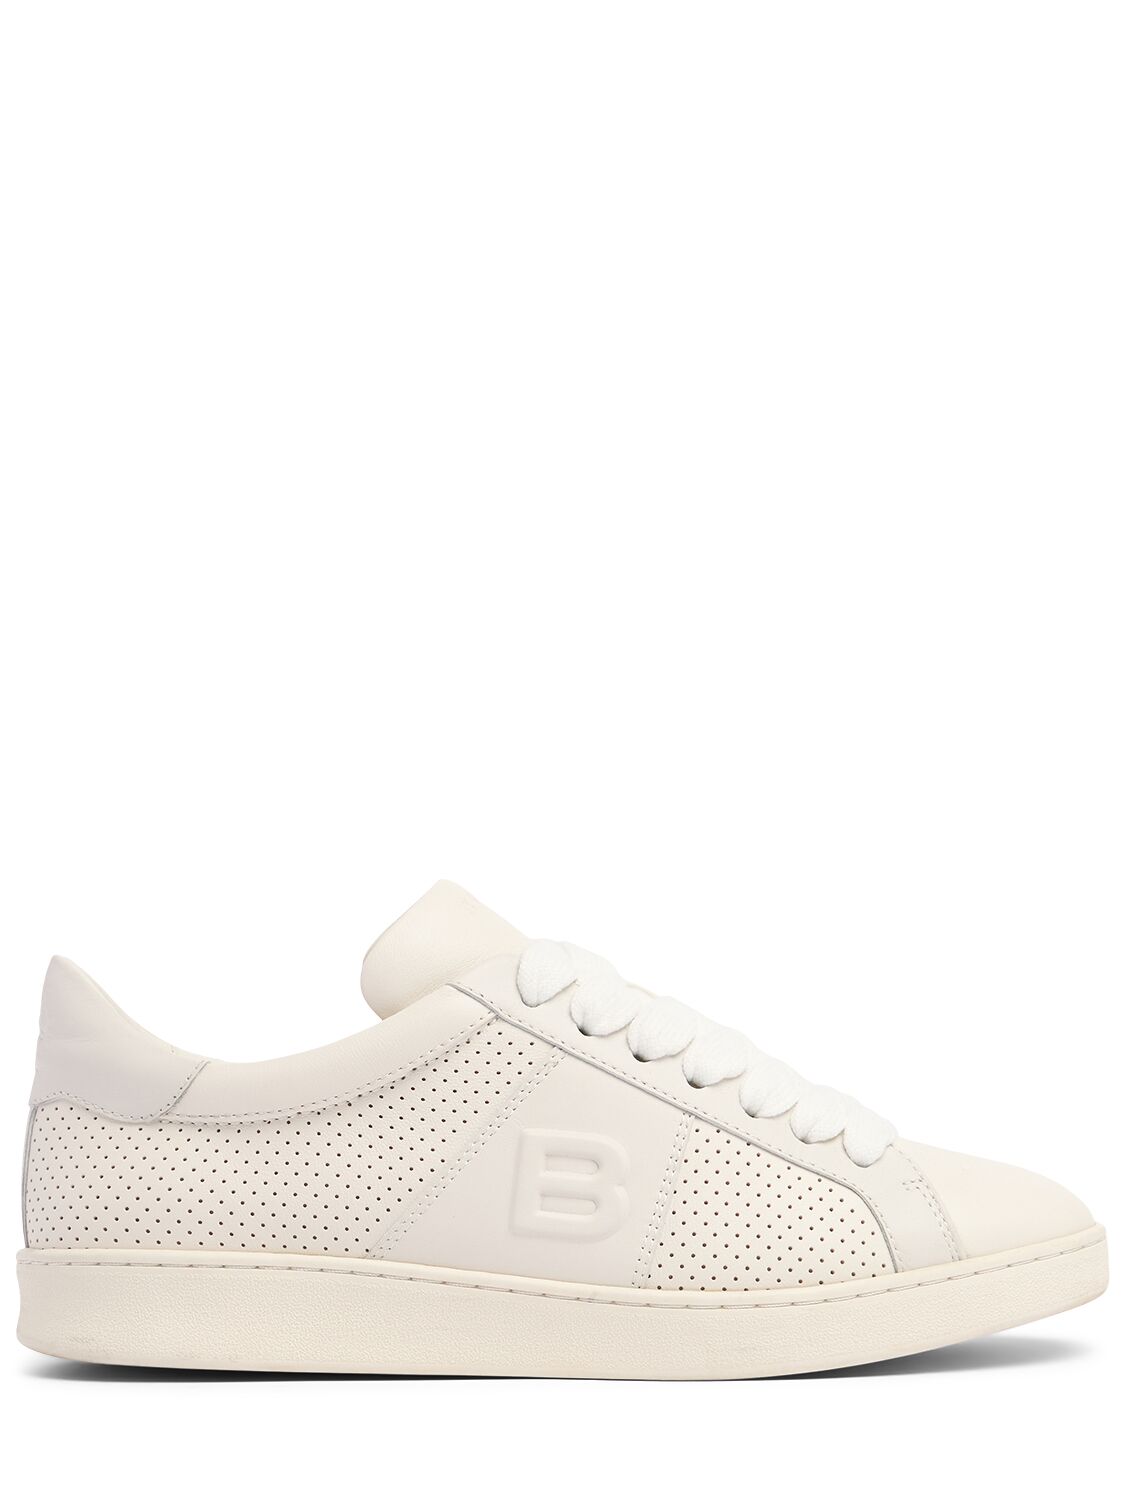 Bally Trevys Leather Sneakers In White